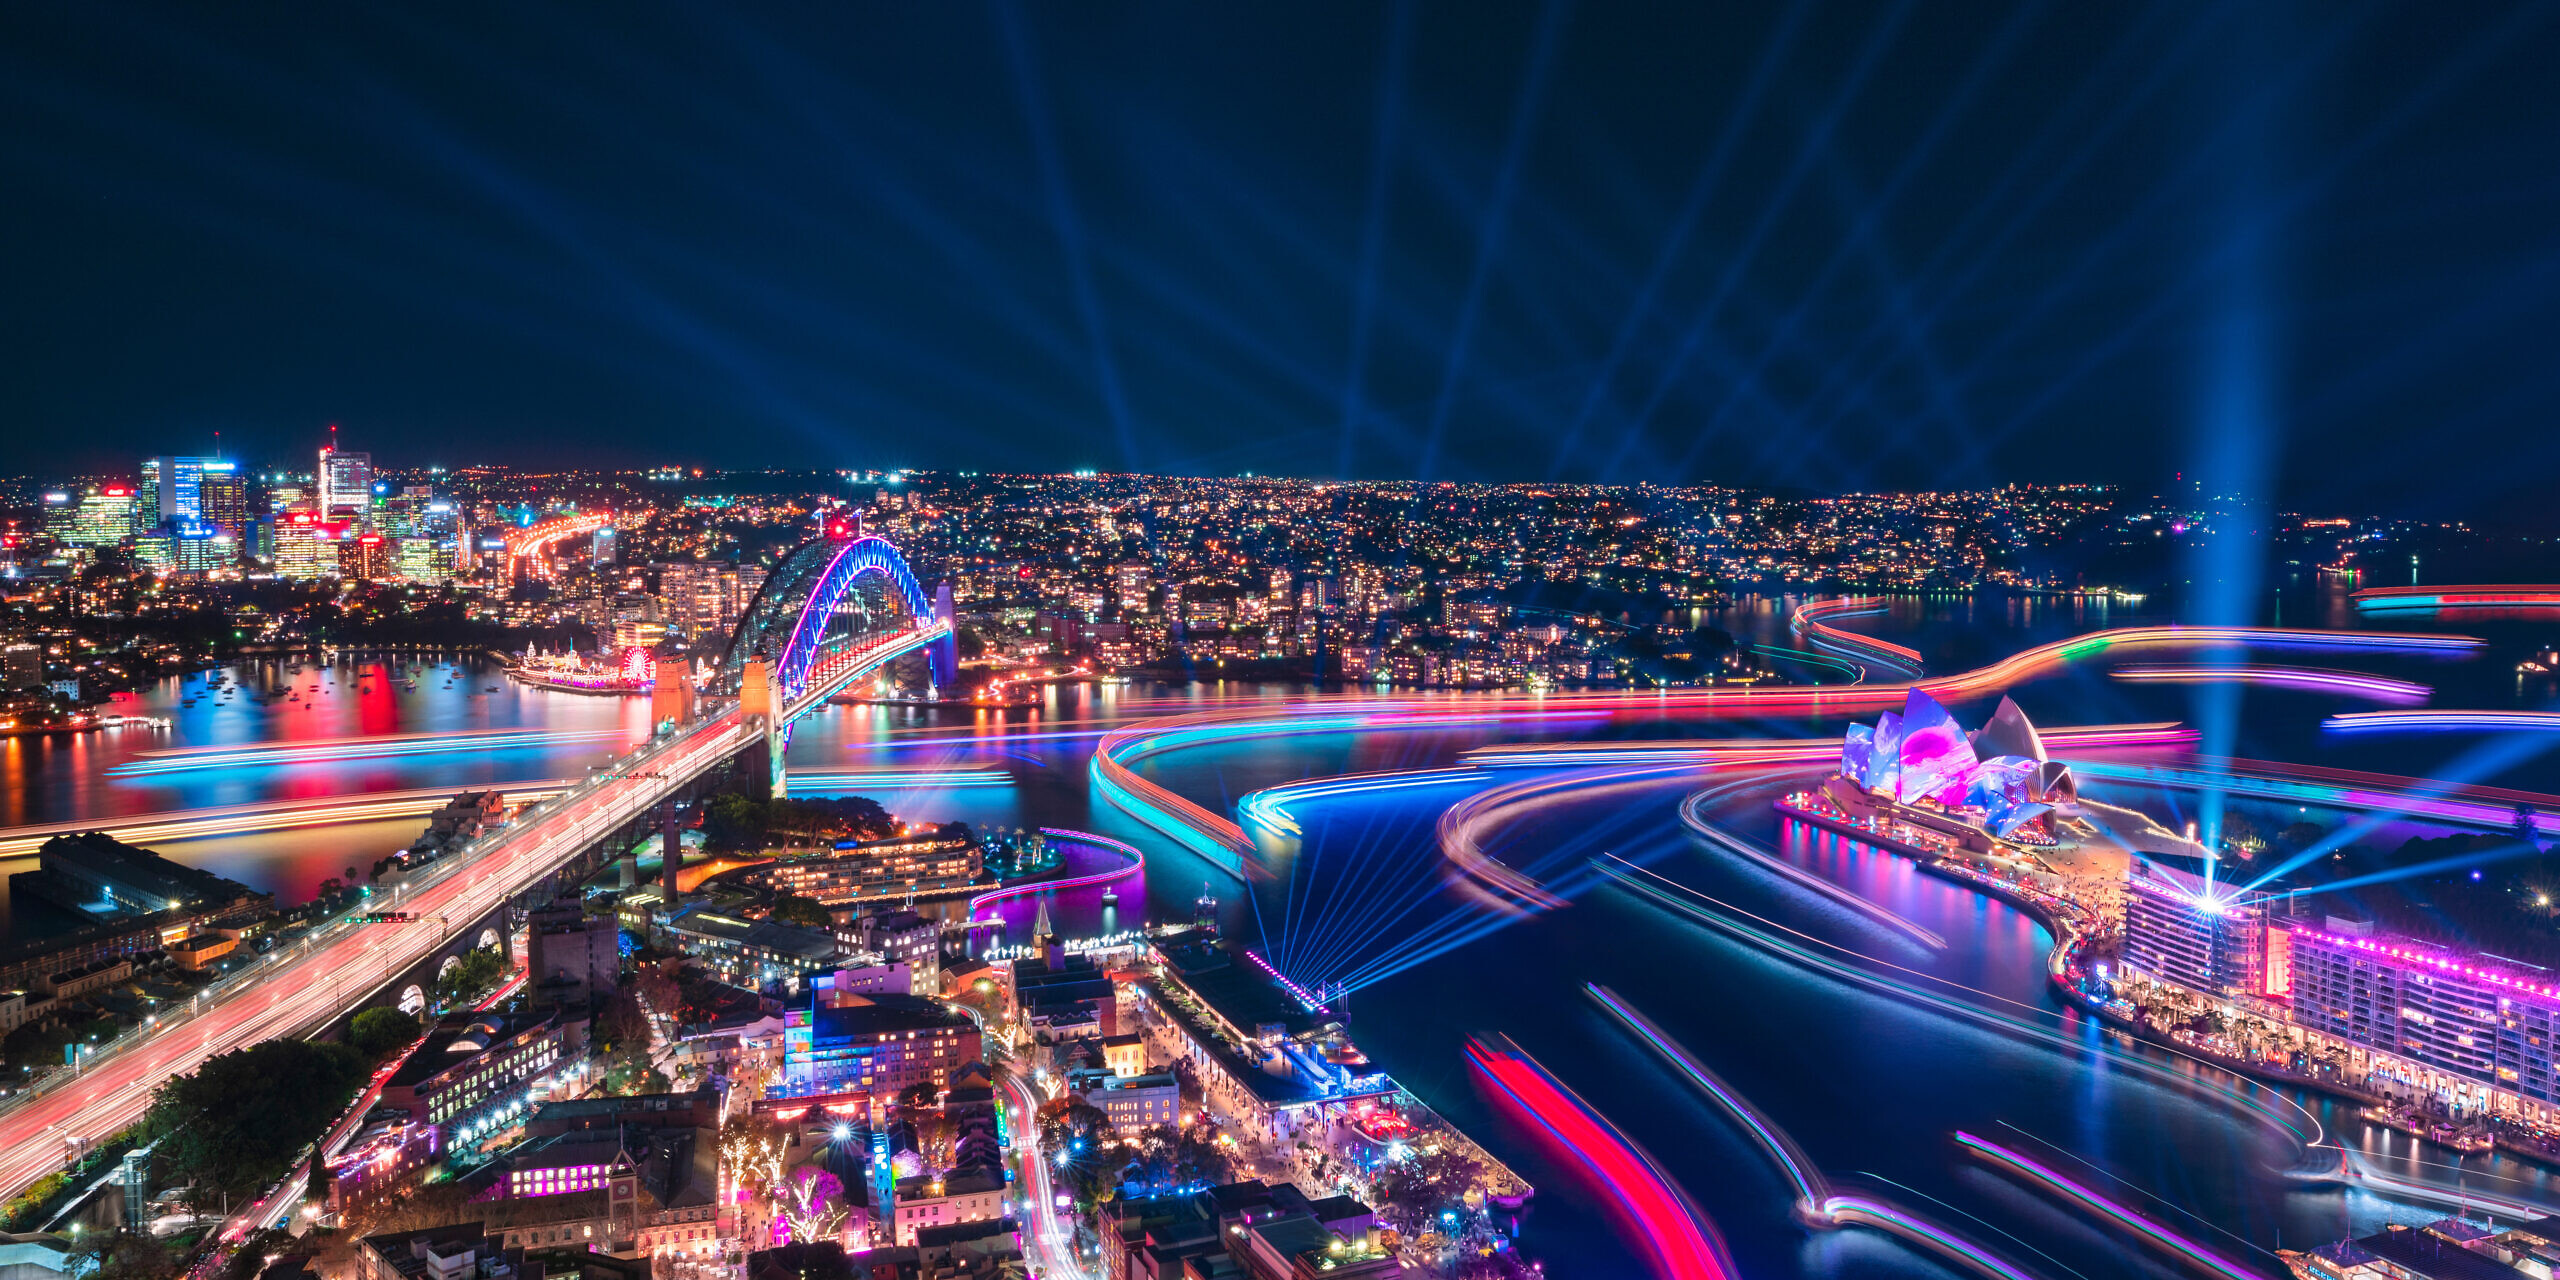 Views of Harbour Lights installations on marine vessels moving across Sydney Harbour during Vivid Sydney 2019. Photo: Destination NSW